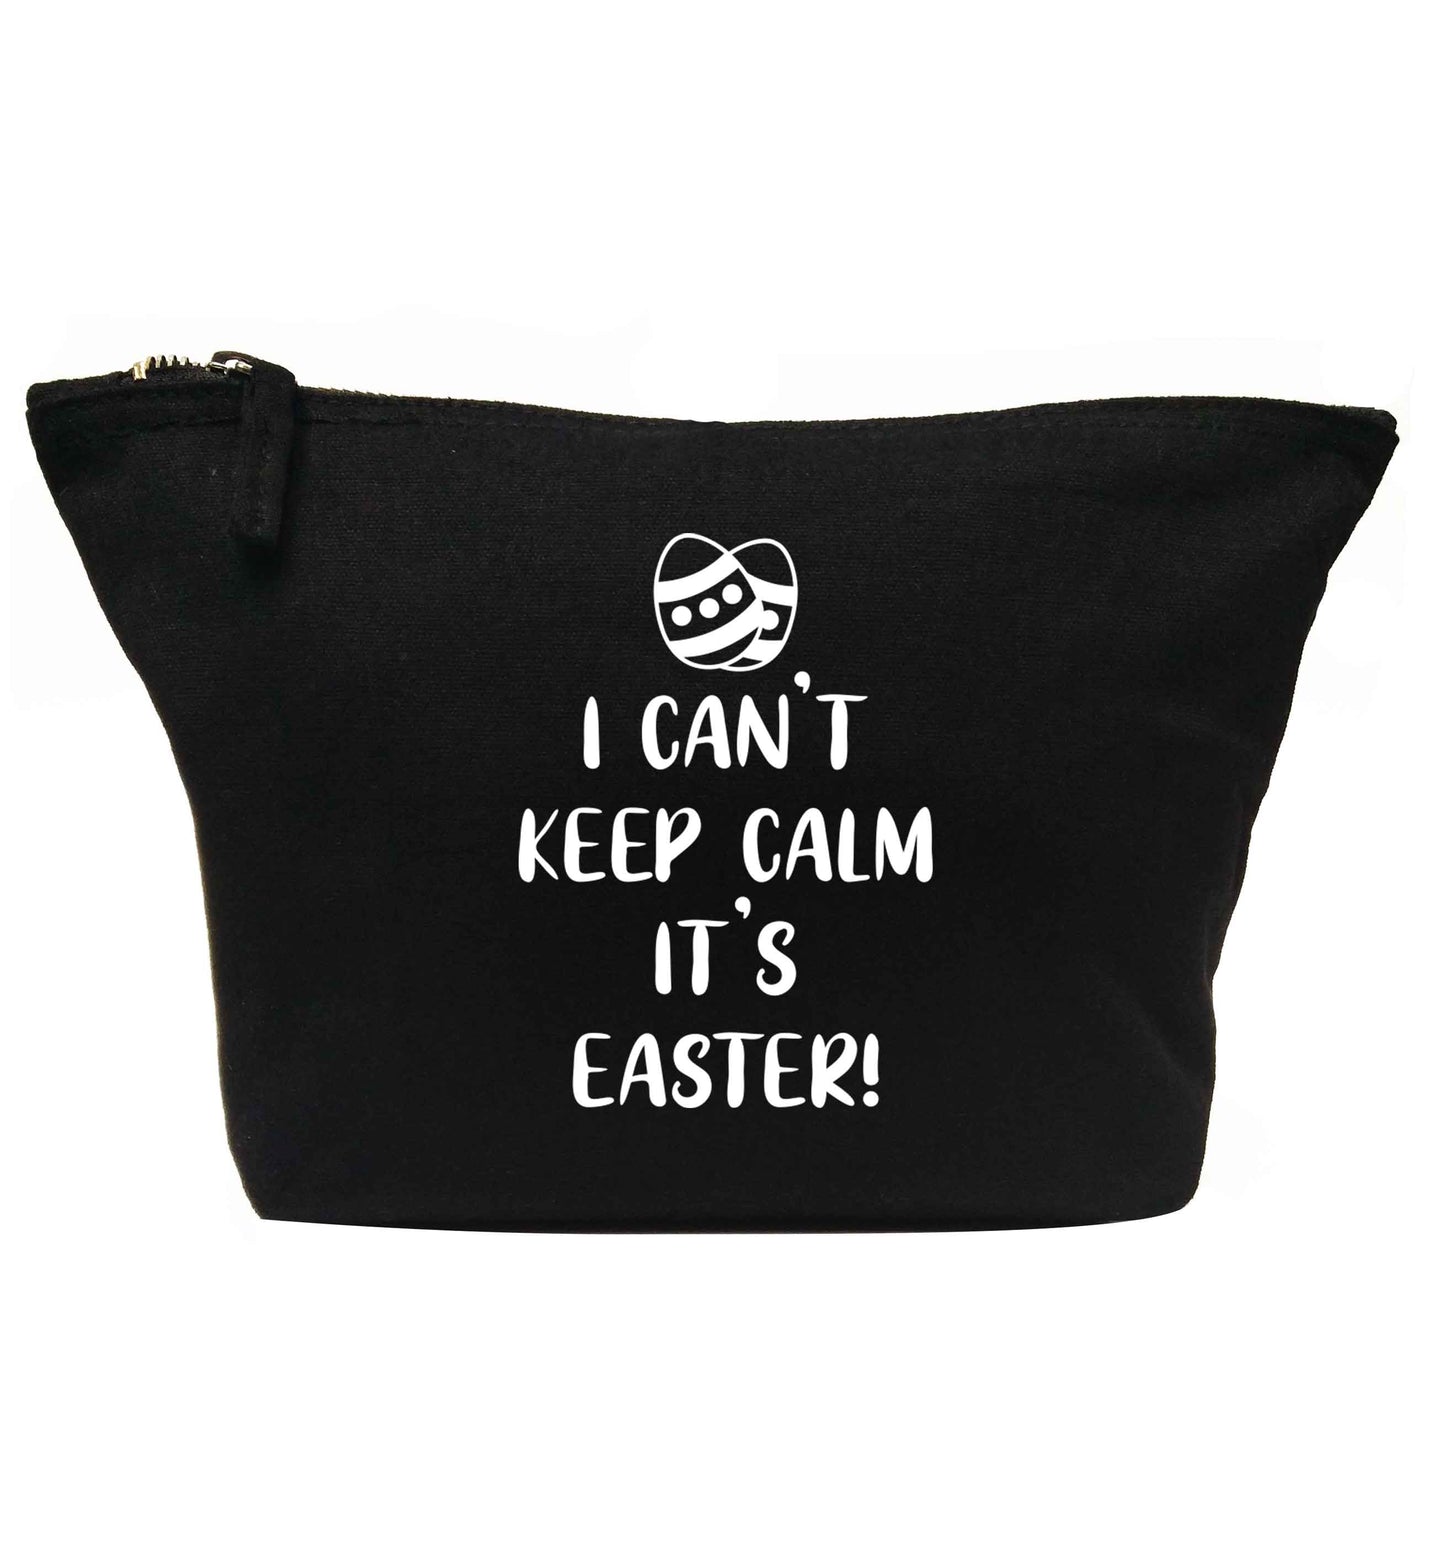 I can't keep calm it's Easter | Makeup / wash bag